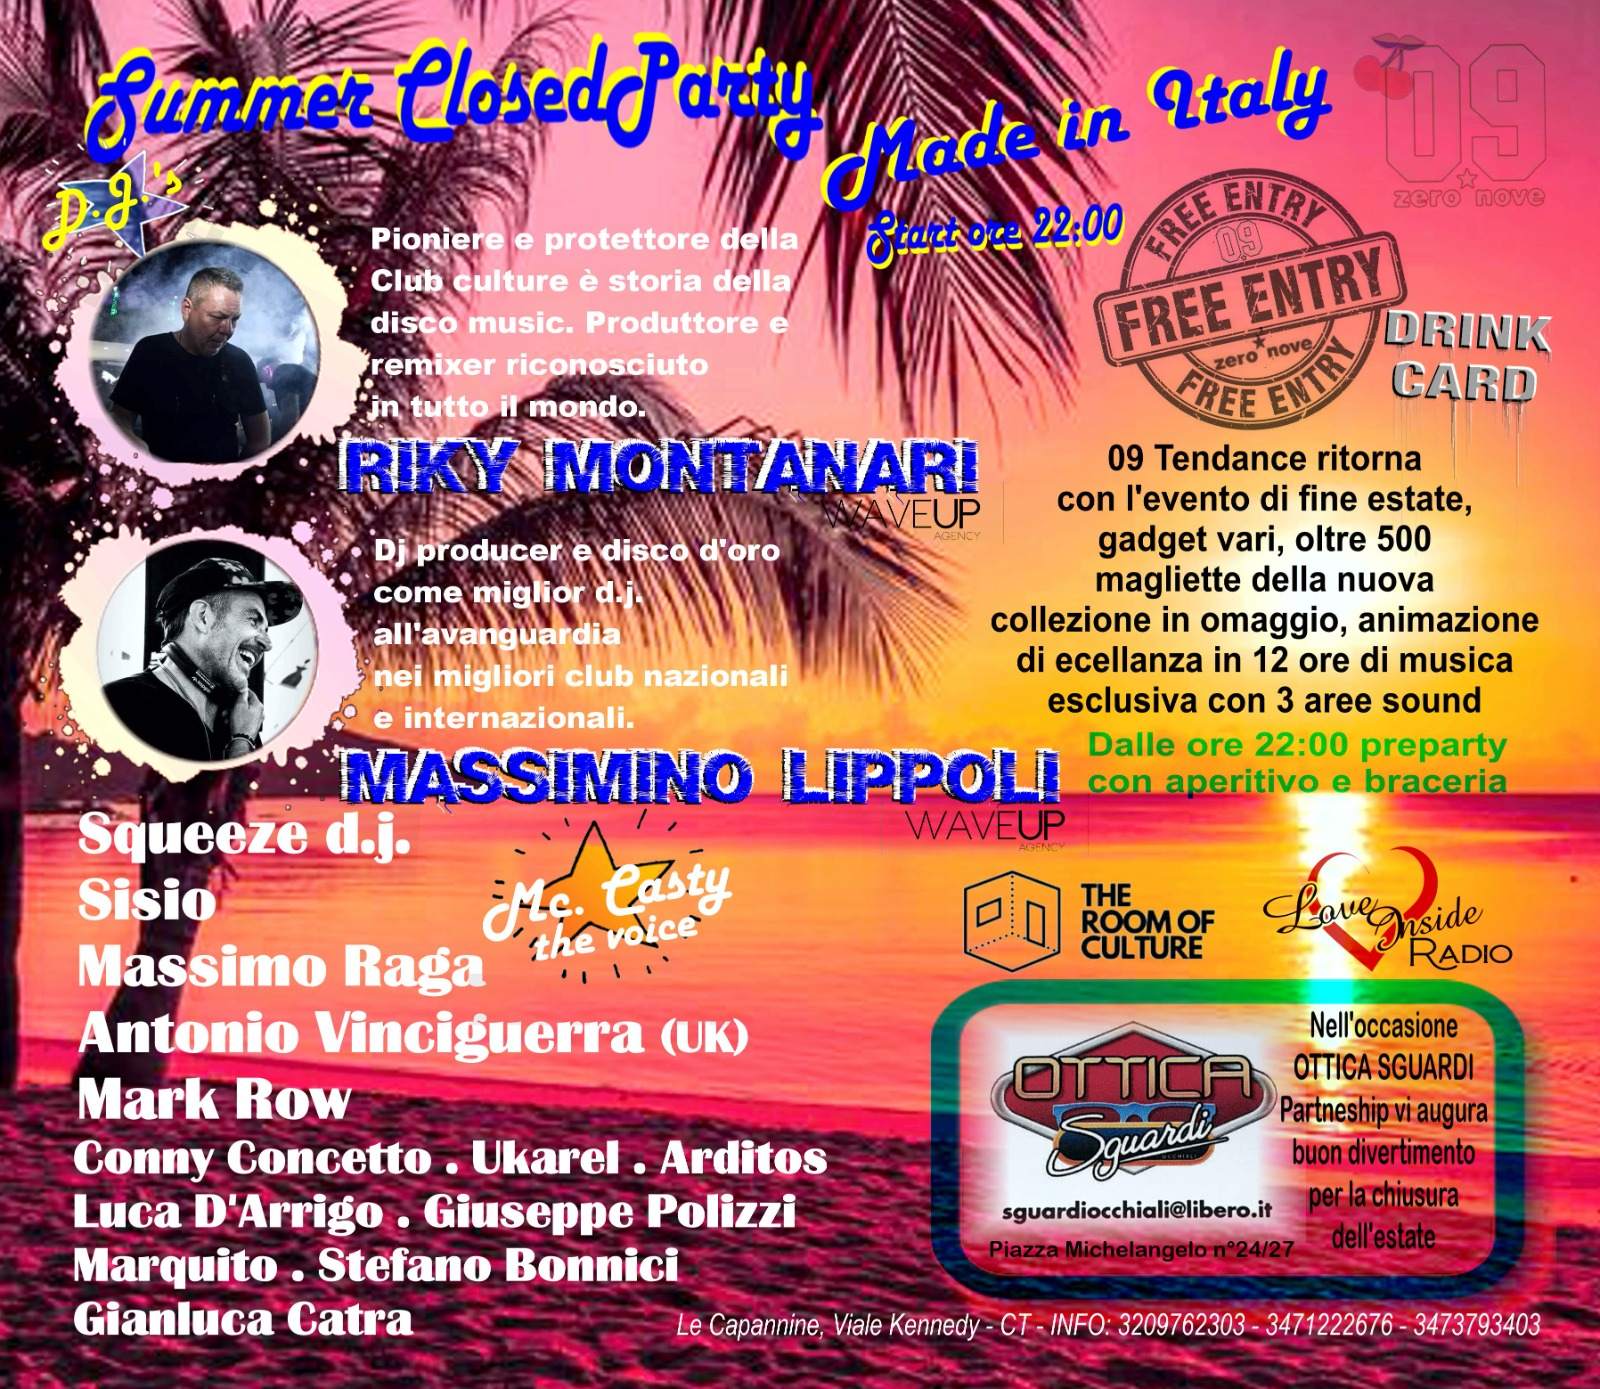 SUMMER CLOSED PARTY - MADE IN ITALY - フライヤー表